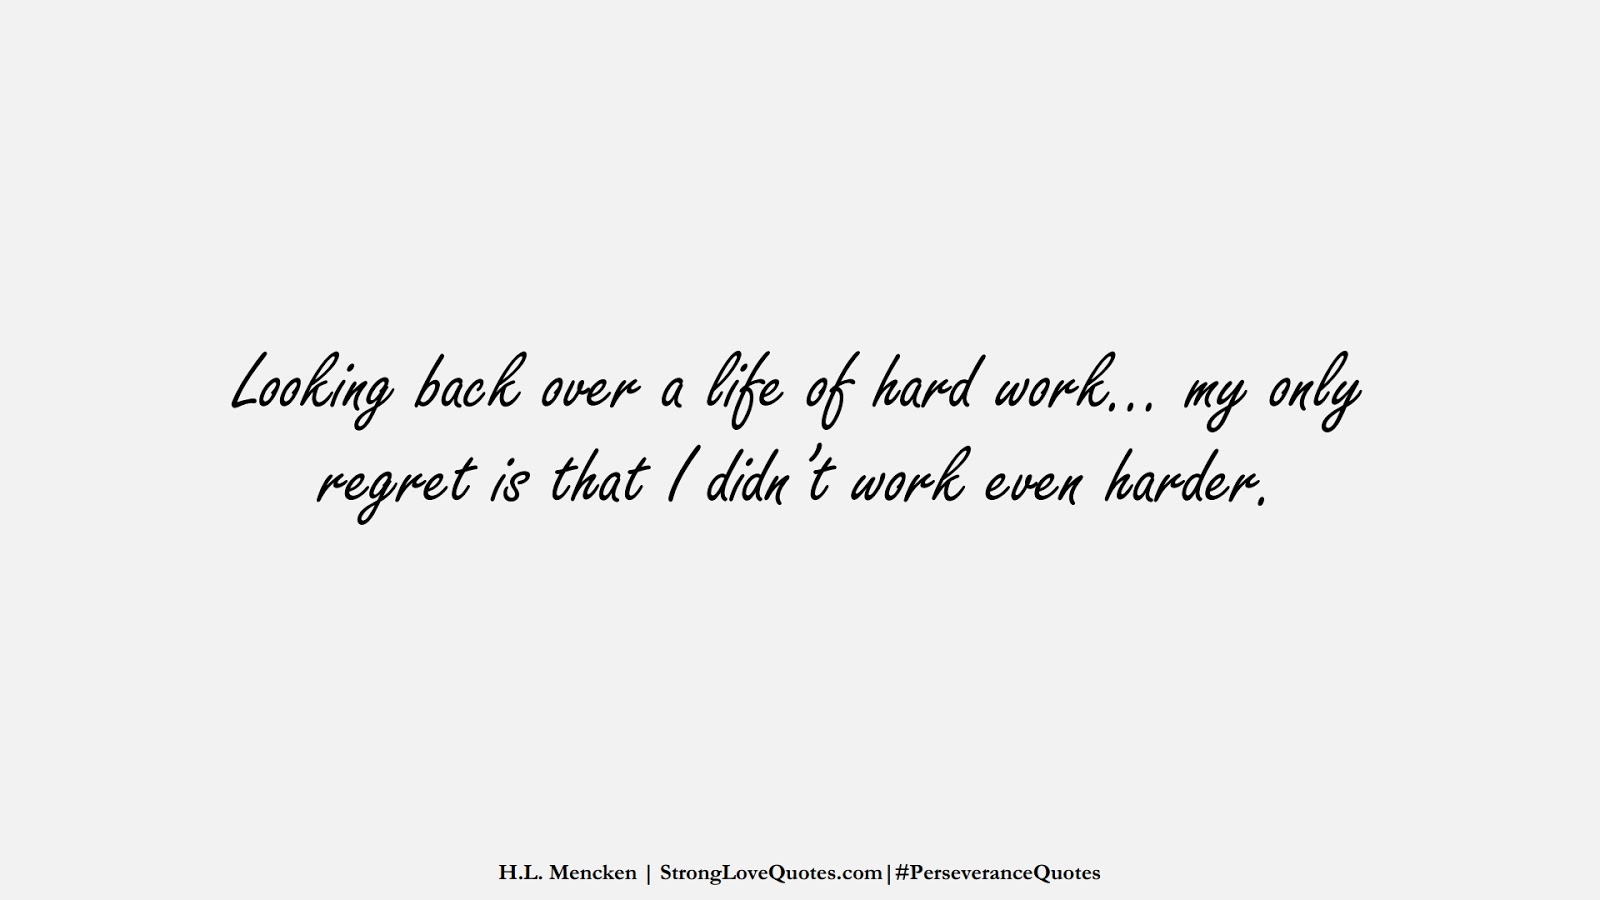 Looking back over a life of hard work… my only regret is that I didn’t work even harder. (H.L. Mencken);  #PerseveranceQuotes